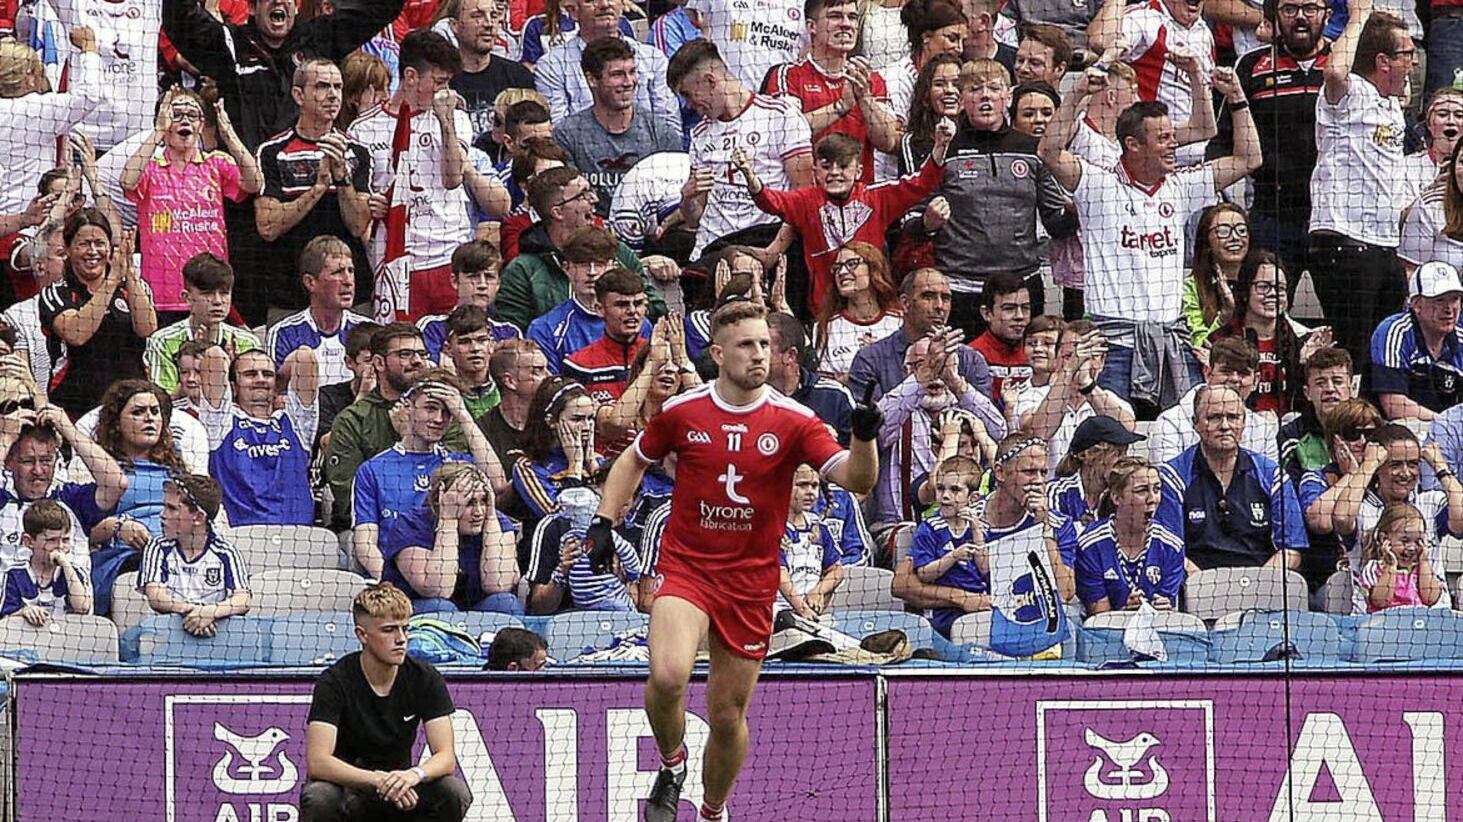 Niall Sludden celebrates his crucial goal for Tyrone against Monaghan in the All-Ireland SFC semi-final.<br /> Picture Seamus Loughran